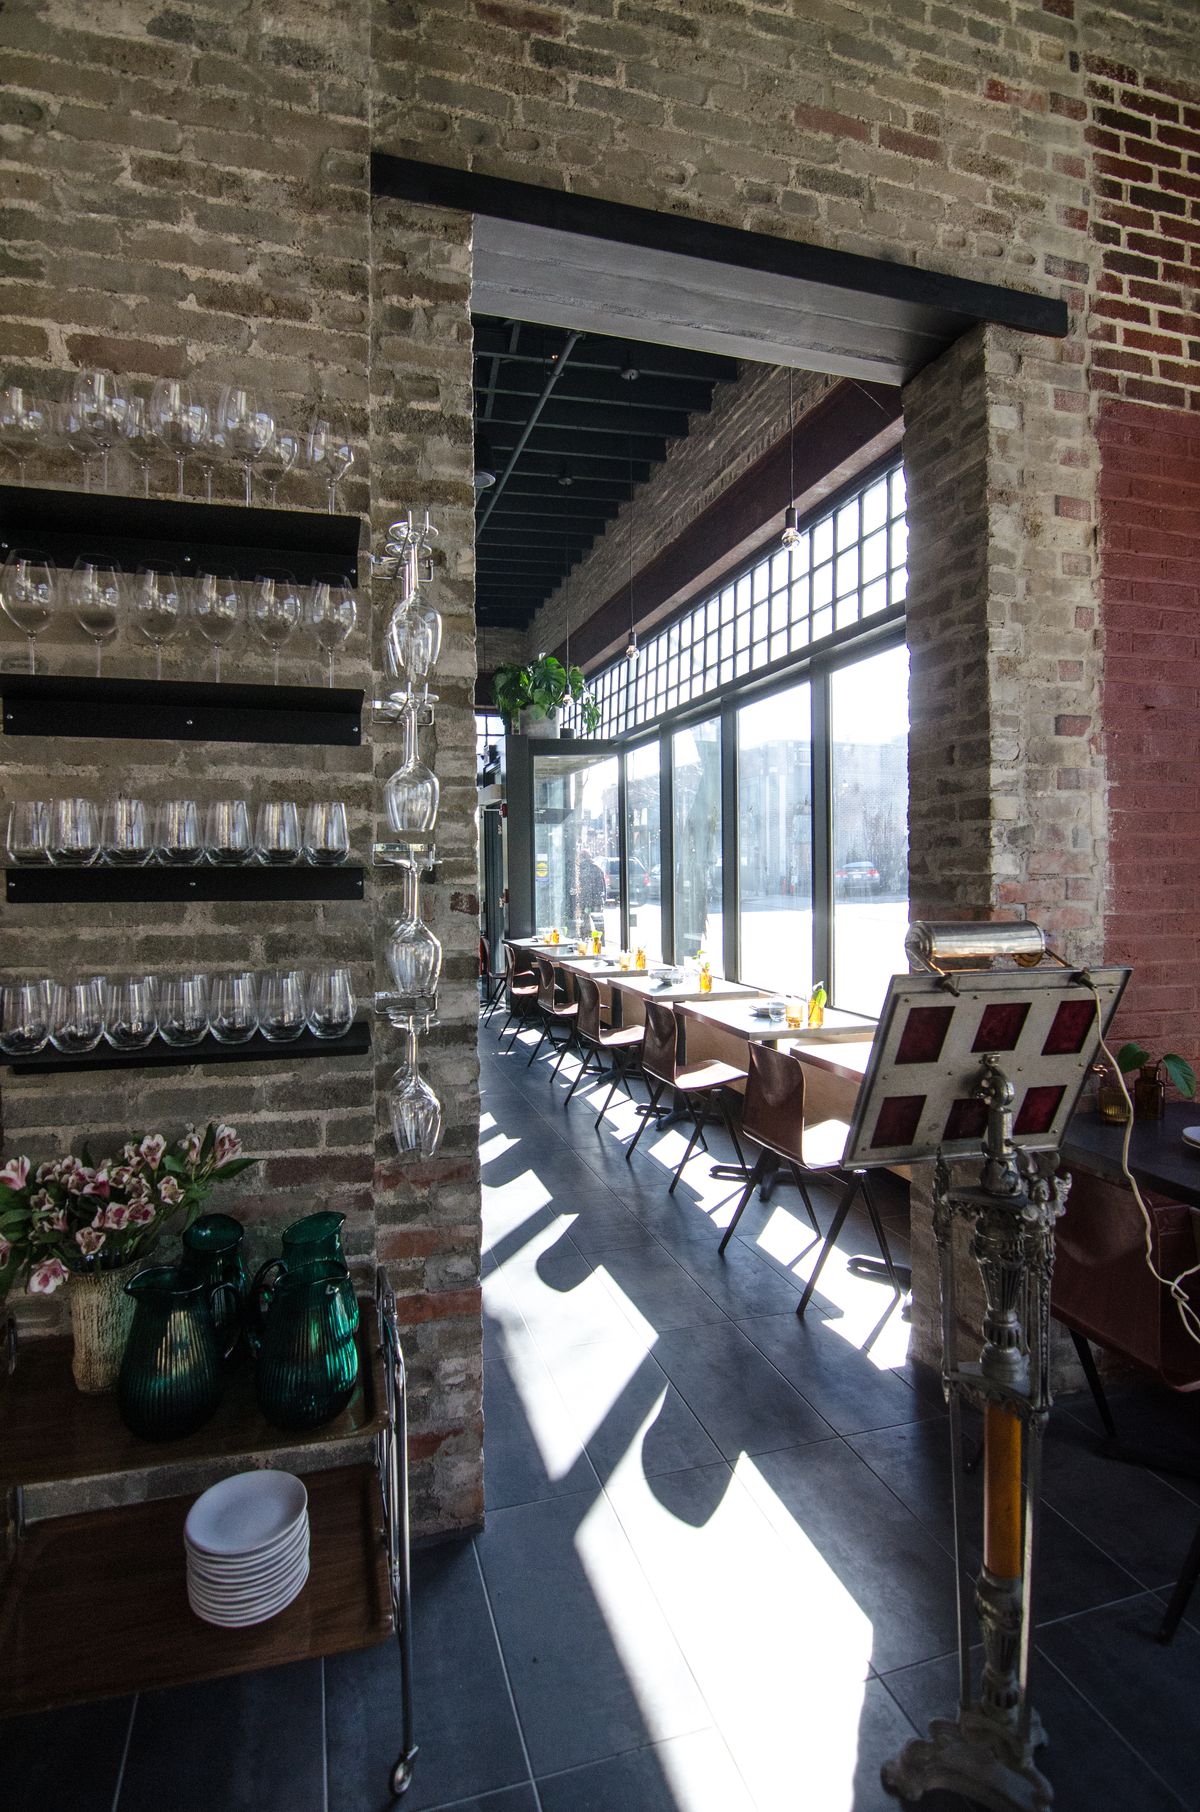 Restaurant interior features lots of exposed gray brick and natural light. An Art Deco-style podium sets off one dining area from another.